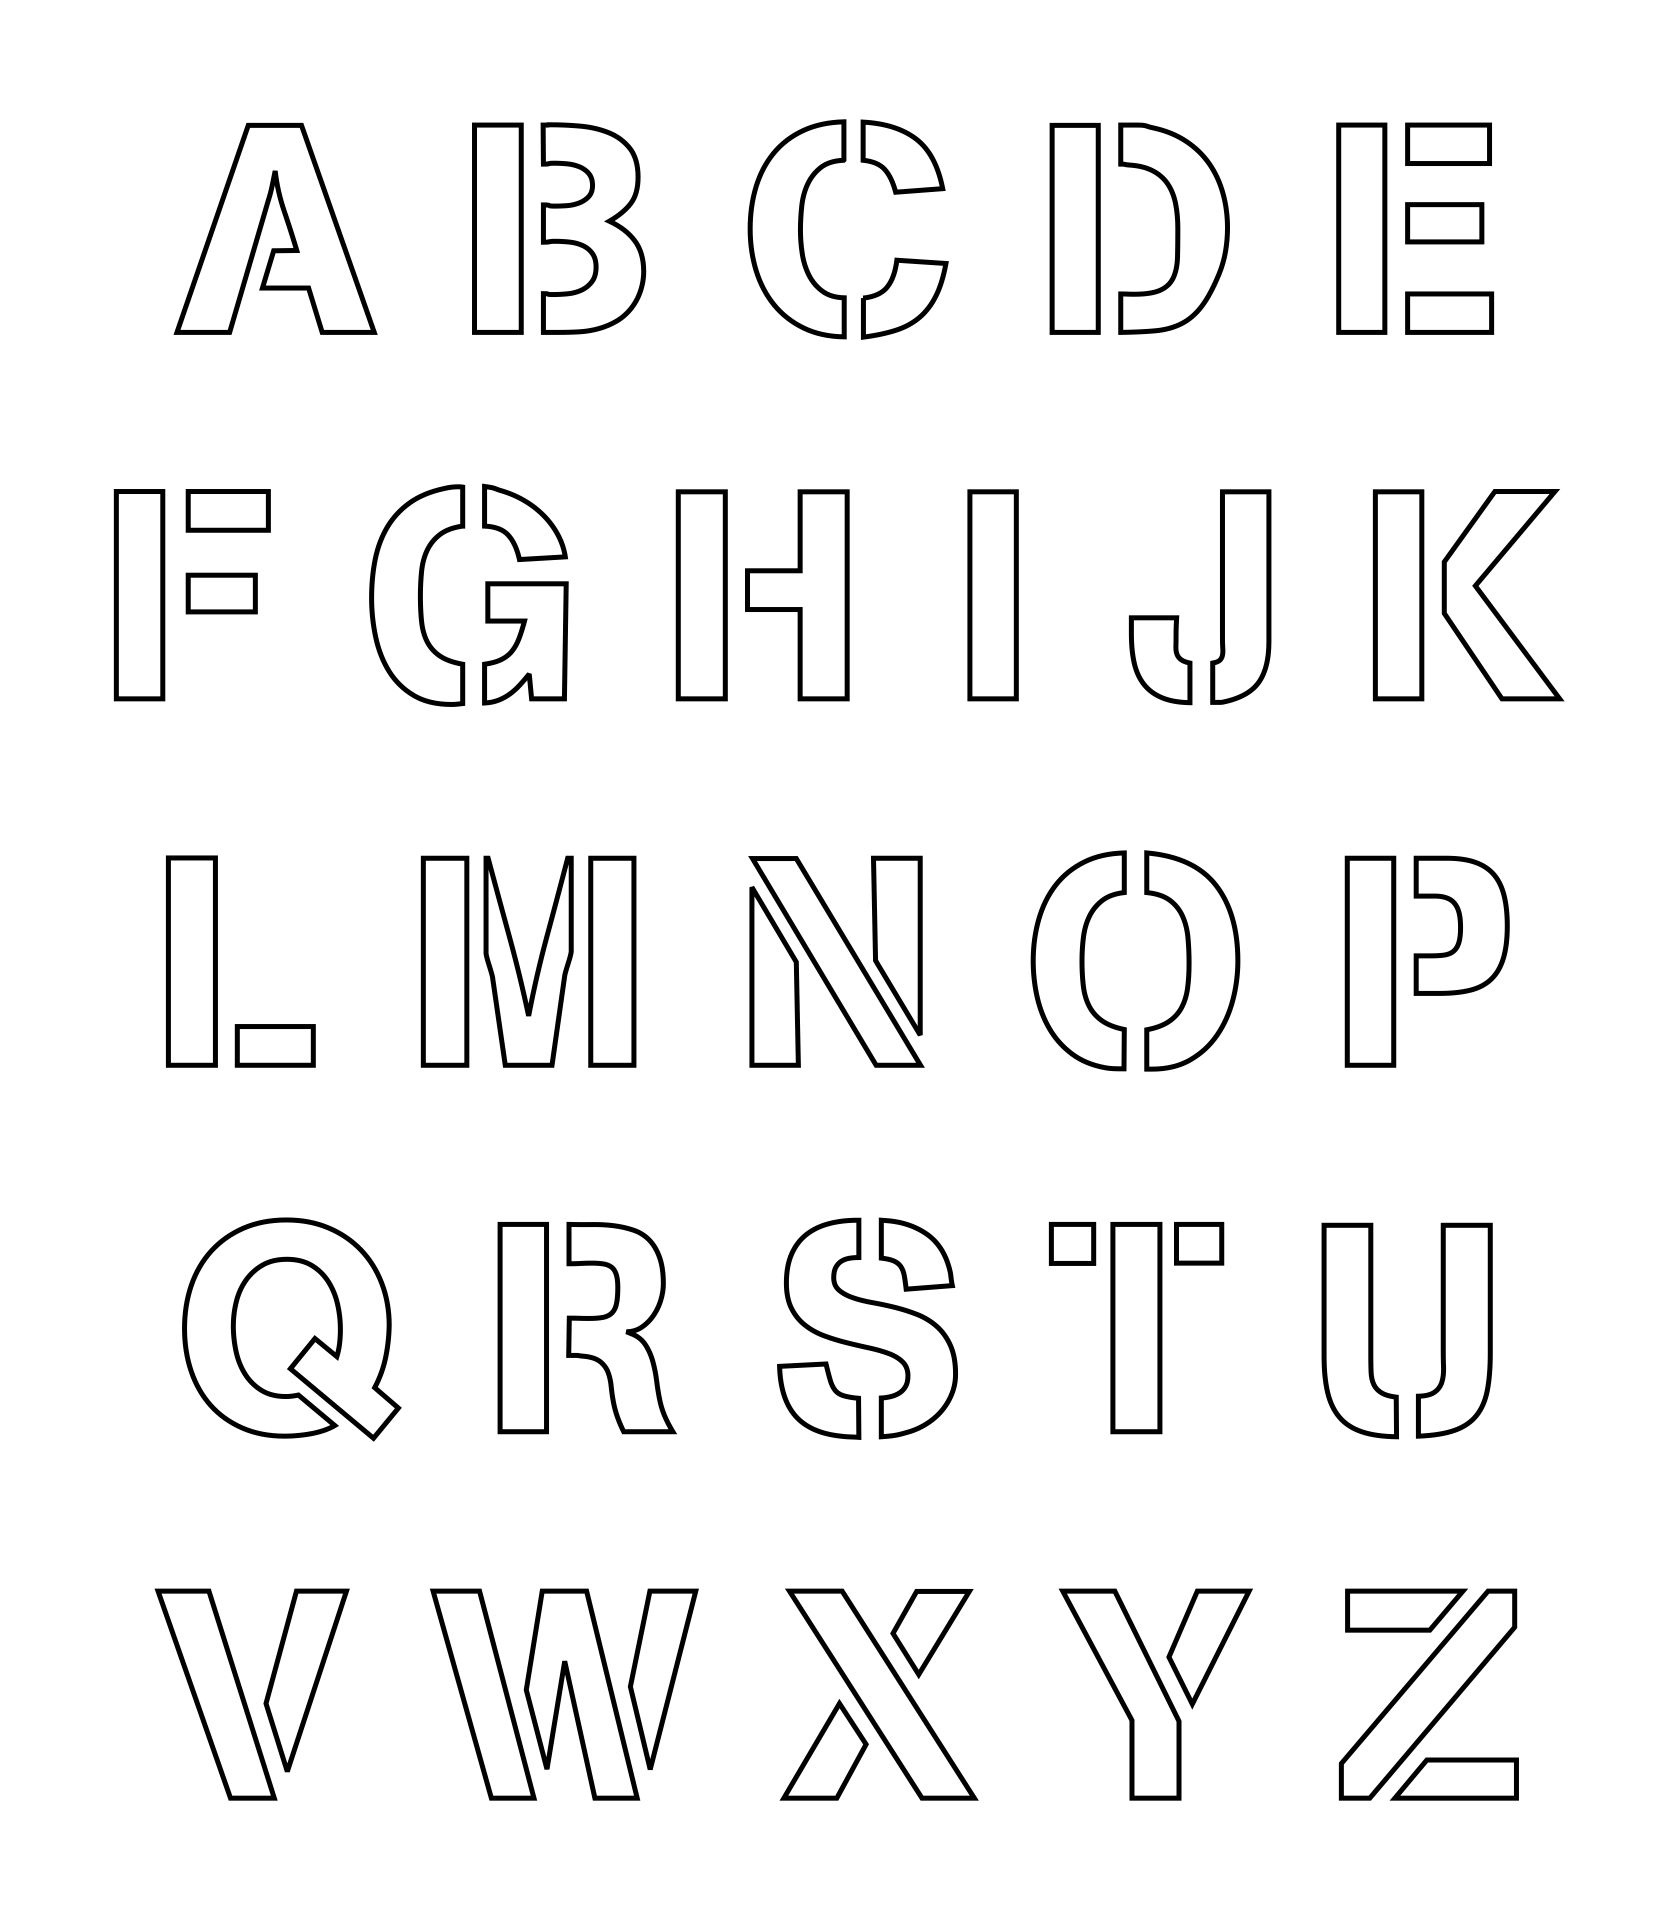 big-letters-big-numbers-downloadable-templates-in-pdf-format-printable-a4-size-uppercase